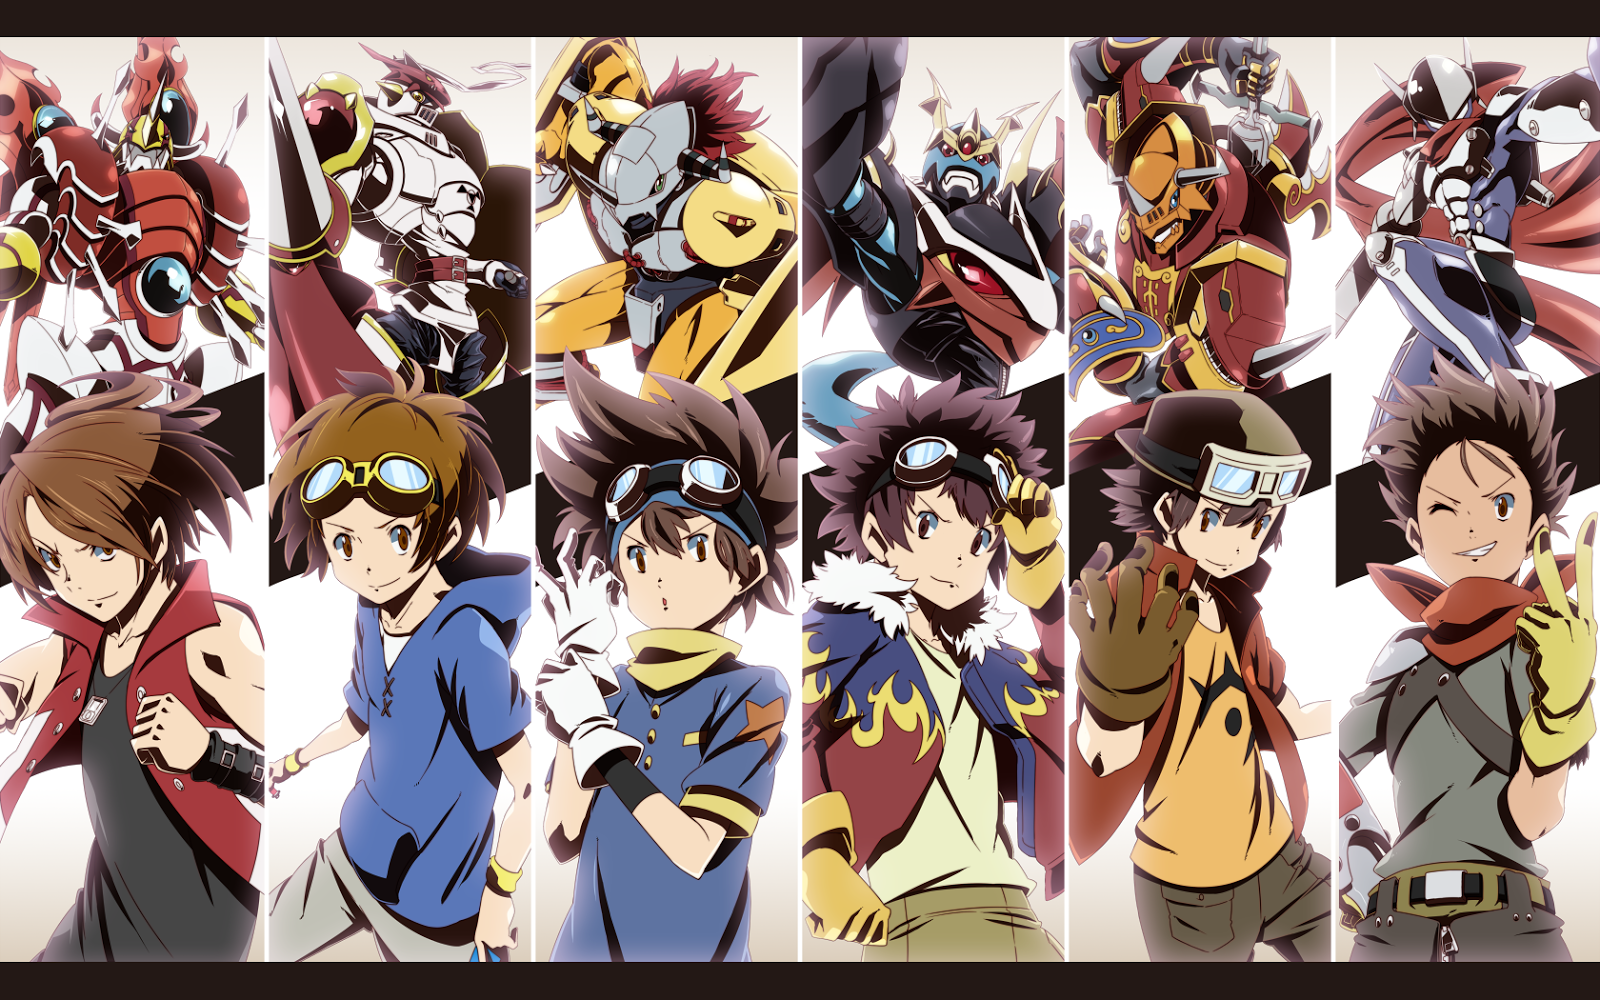 4th Part Of Digimon 15th Anniversary Project To Be Revealed On